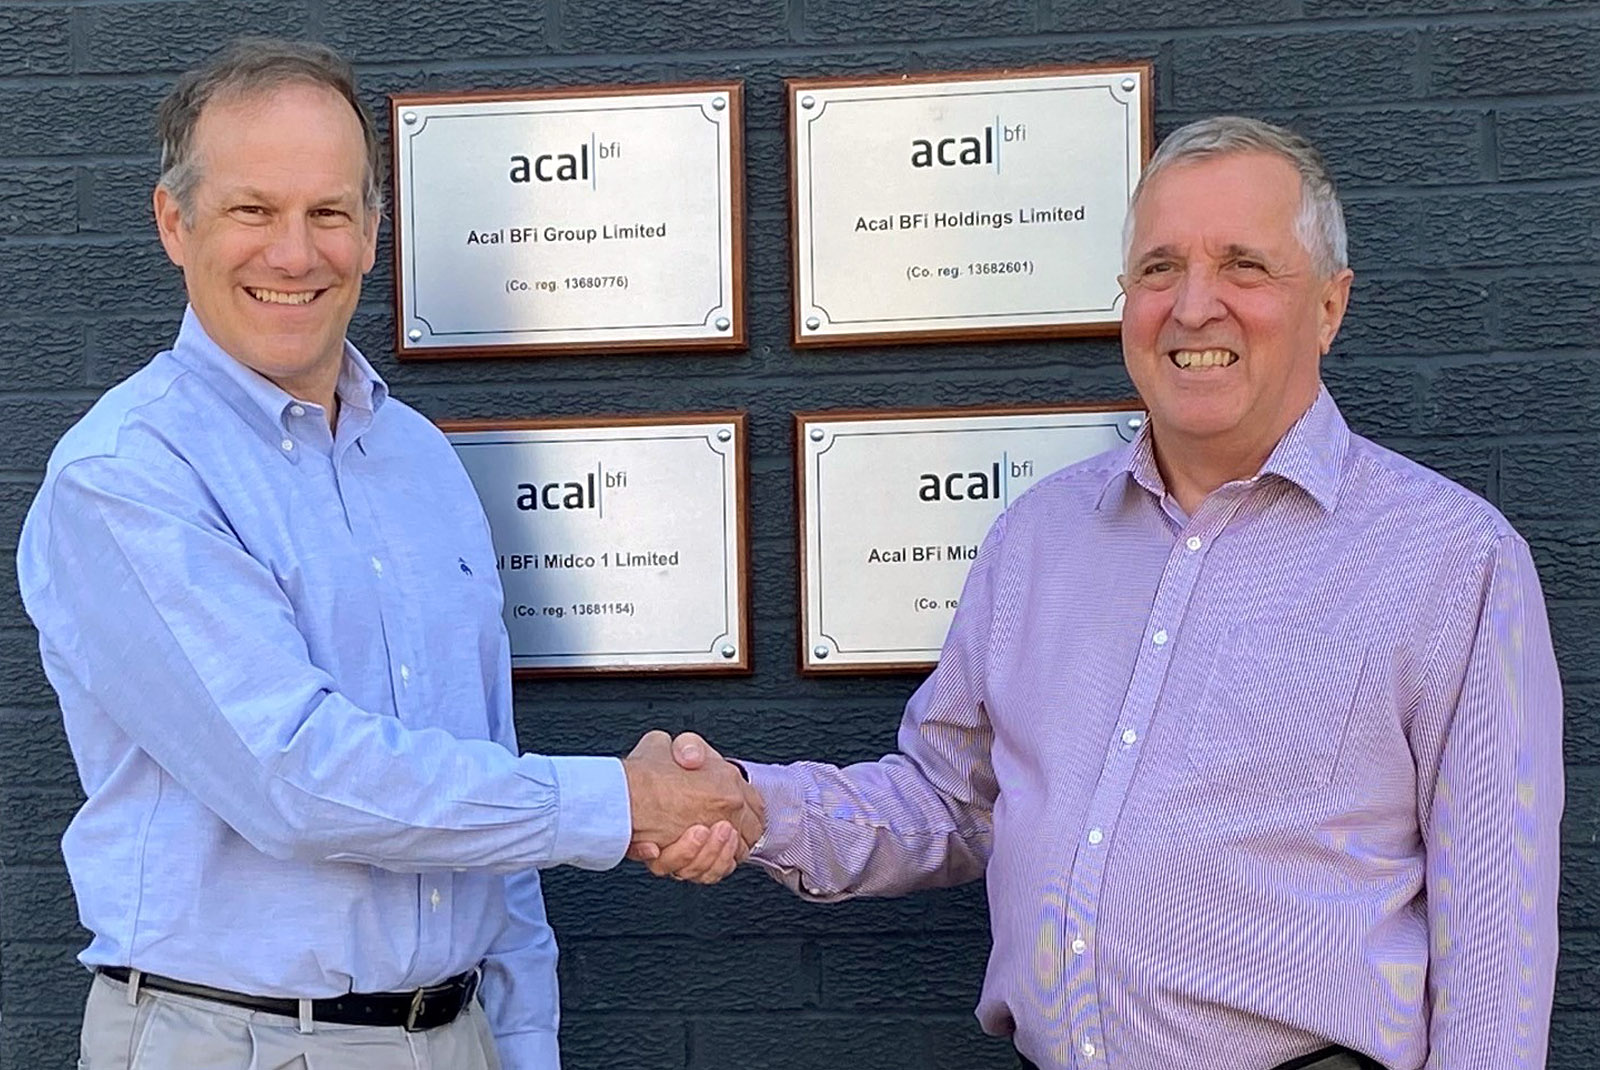 Acal BFI and Videology signs a distribution agreement